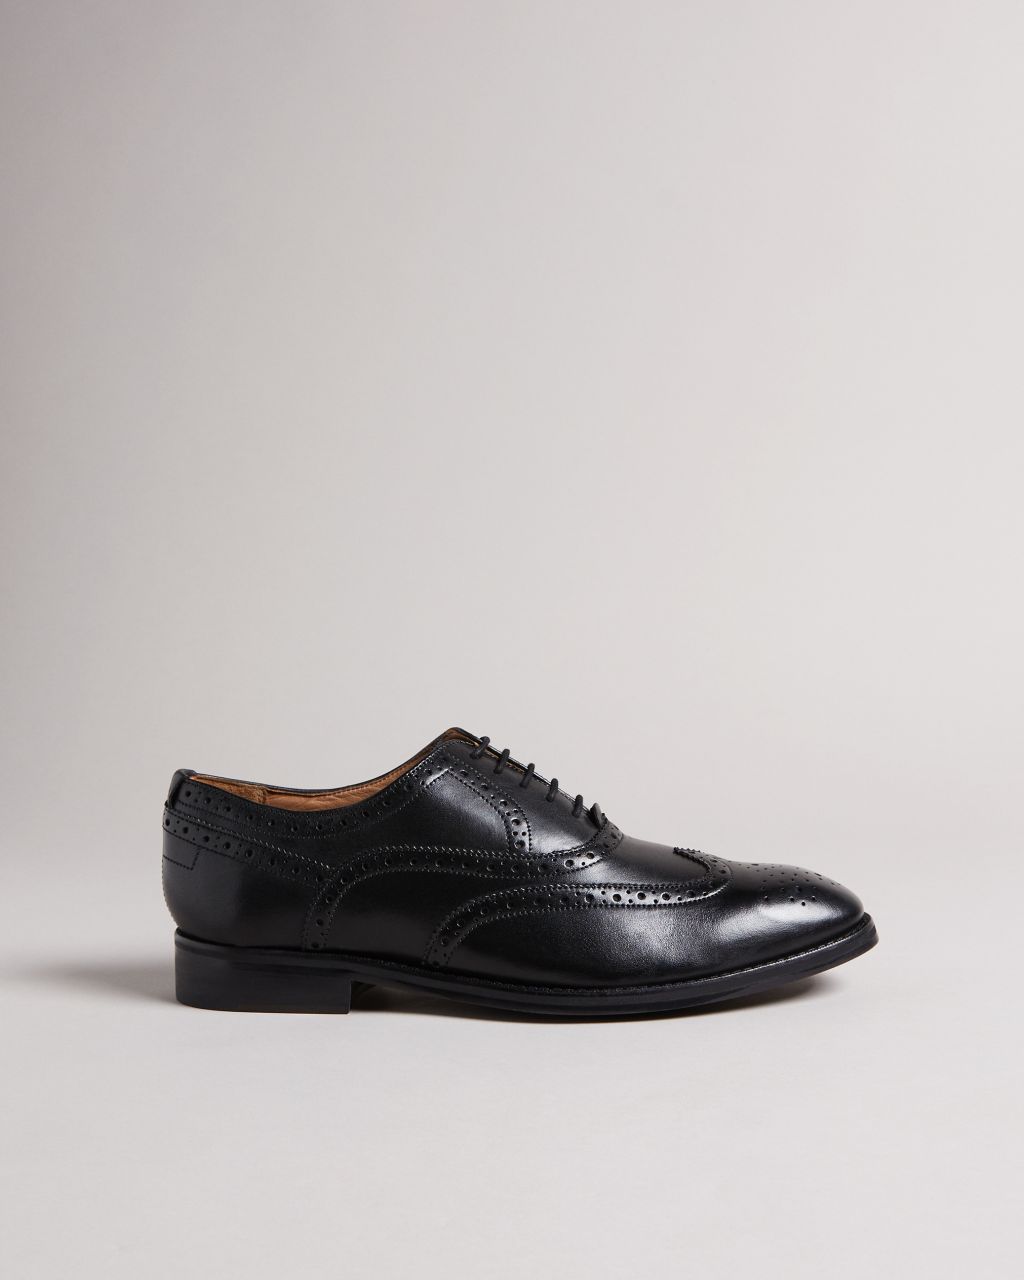 Ted Baker Men's Formal Leather Brogue Shoes in Black, Amaiss